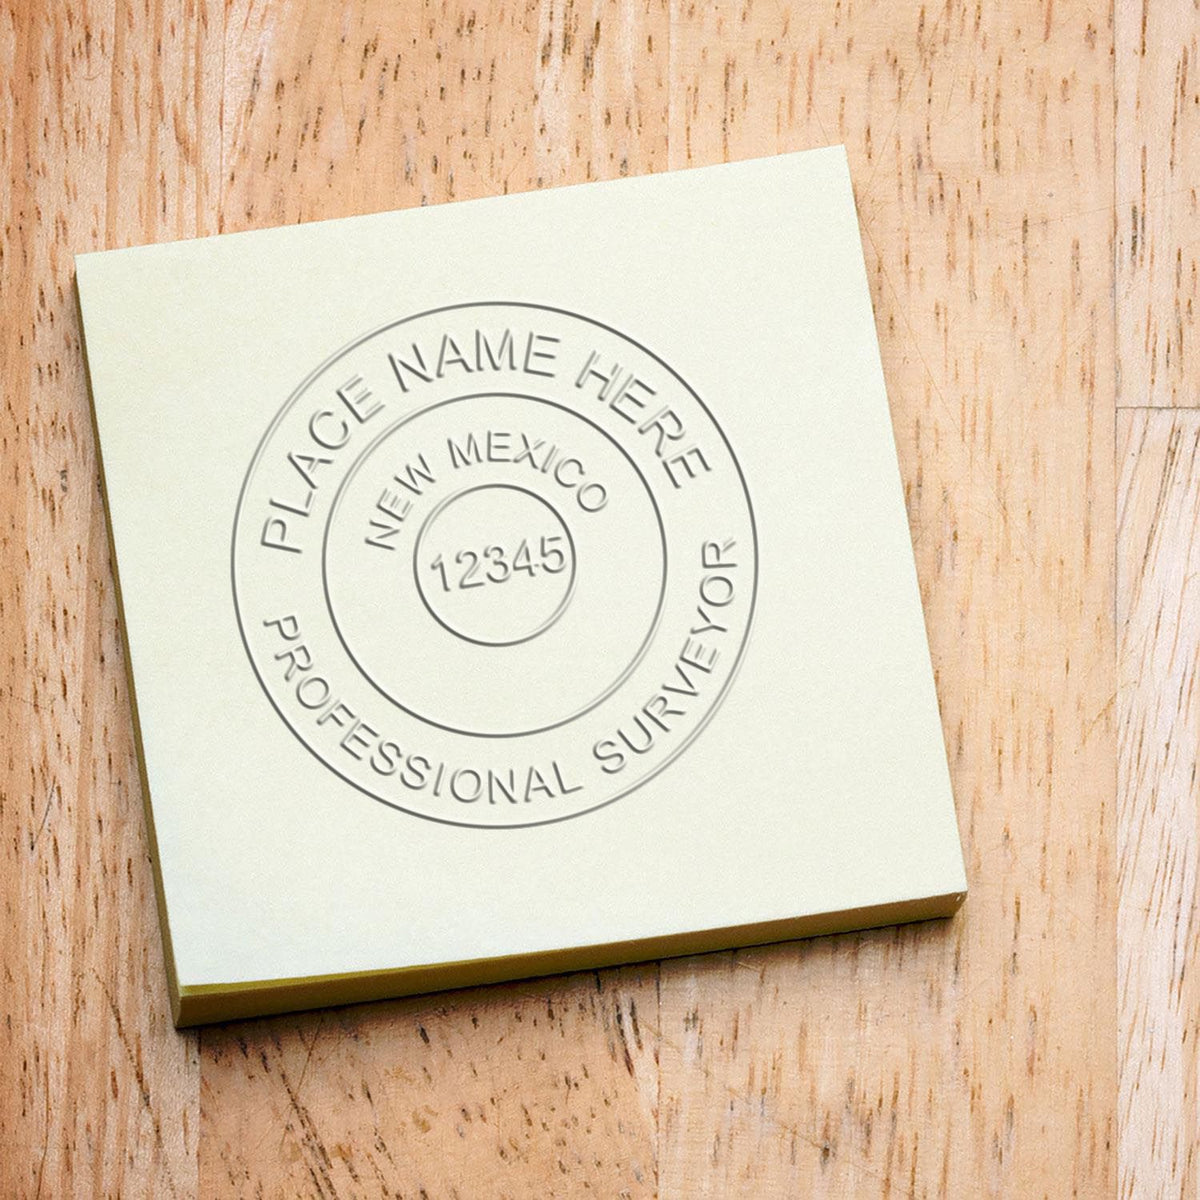 An in use photo of the Gift New Mexico Land Surveyor Seal showing a sample imprint on a cardstock